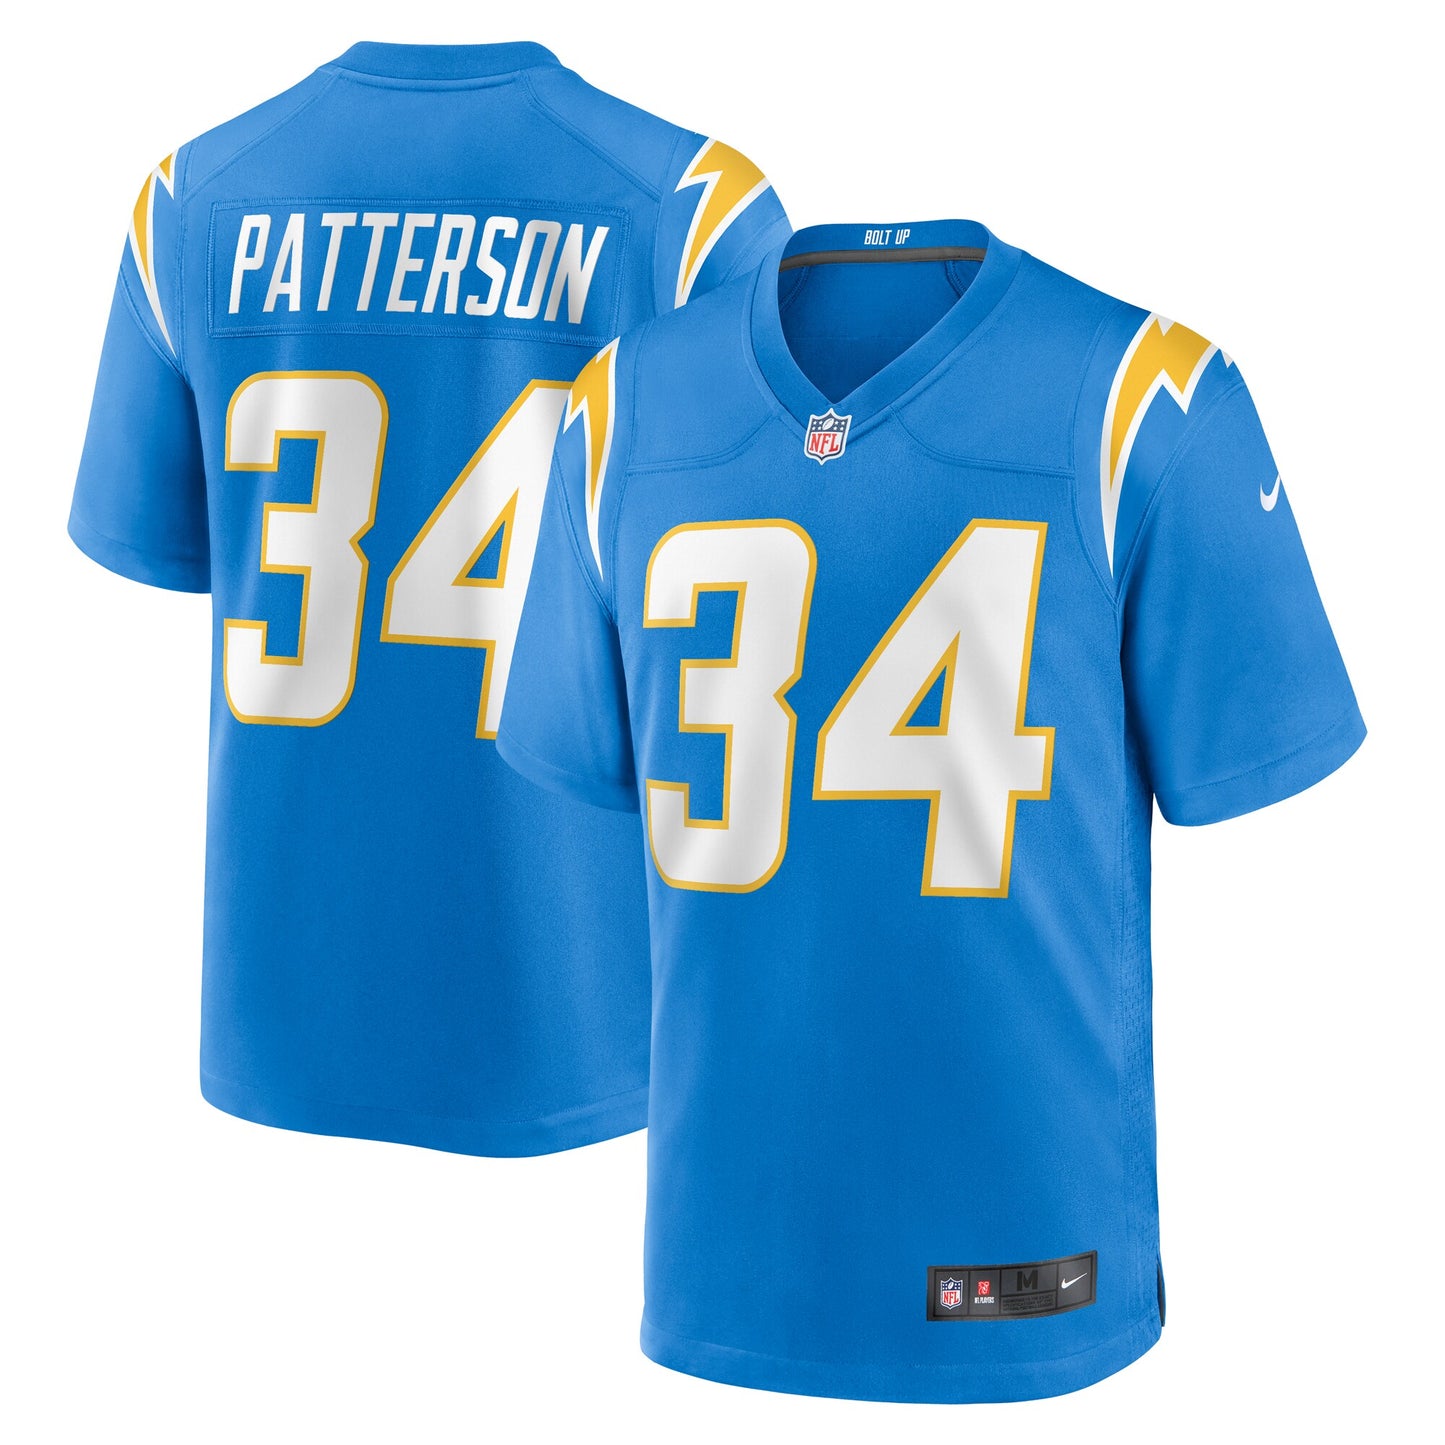 Jaret Patterson Los Angeles Chargers Nike Team Game Jersey -  Powder Blue